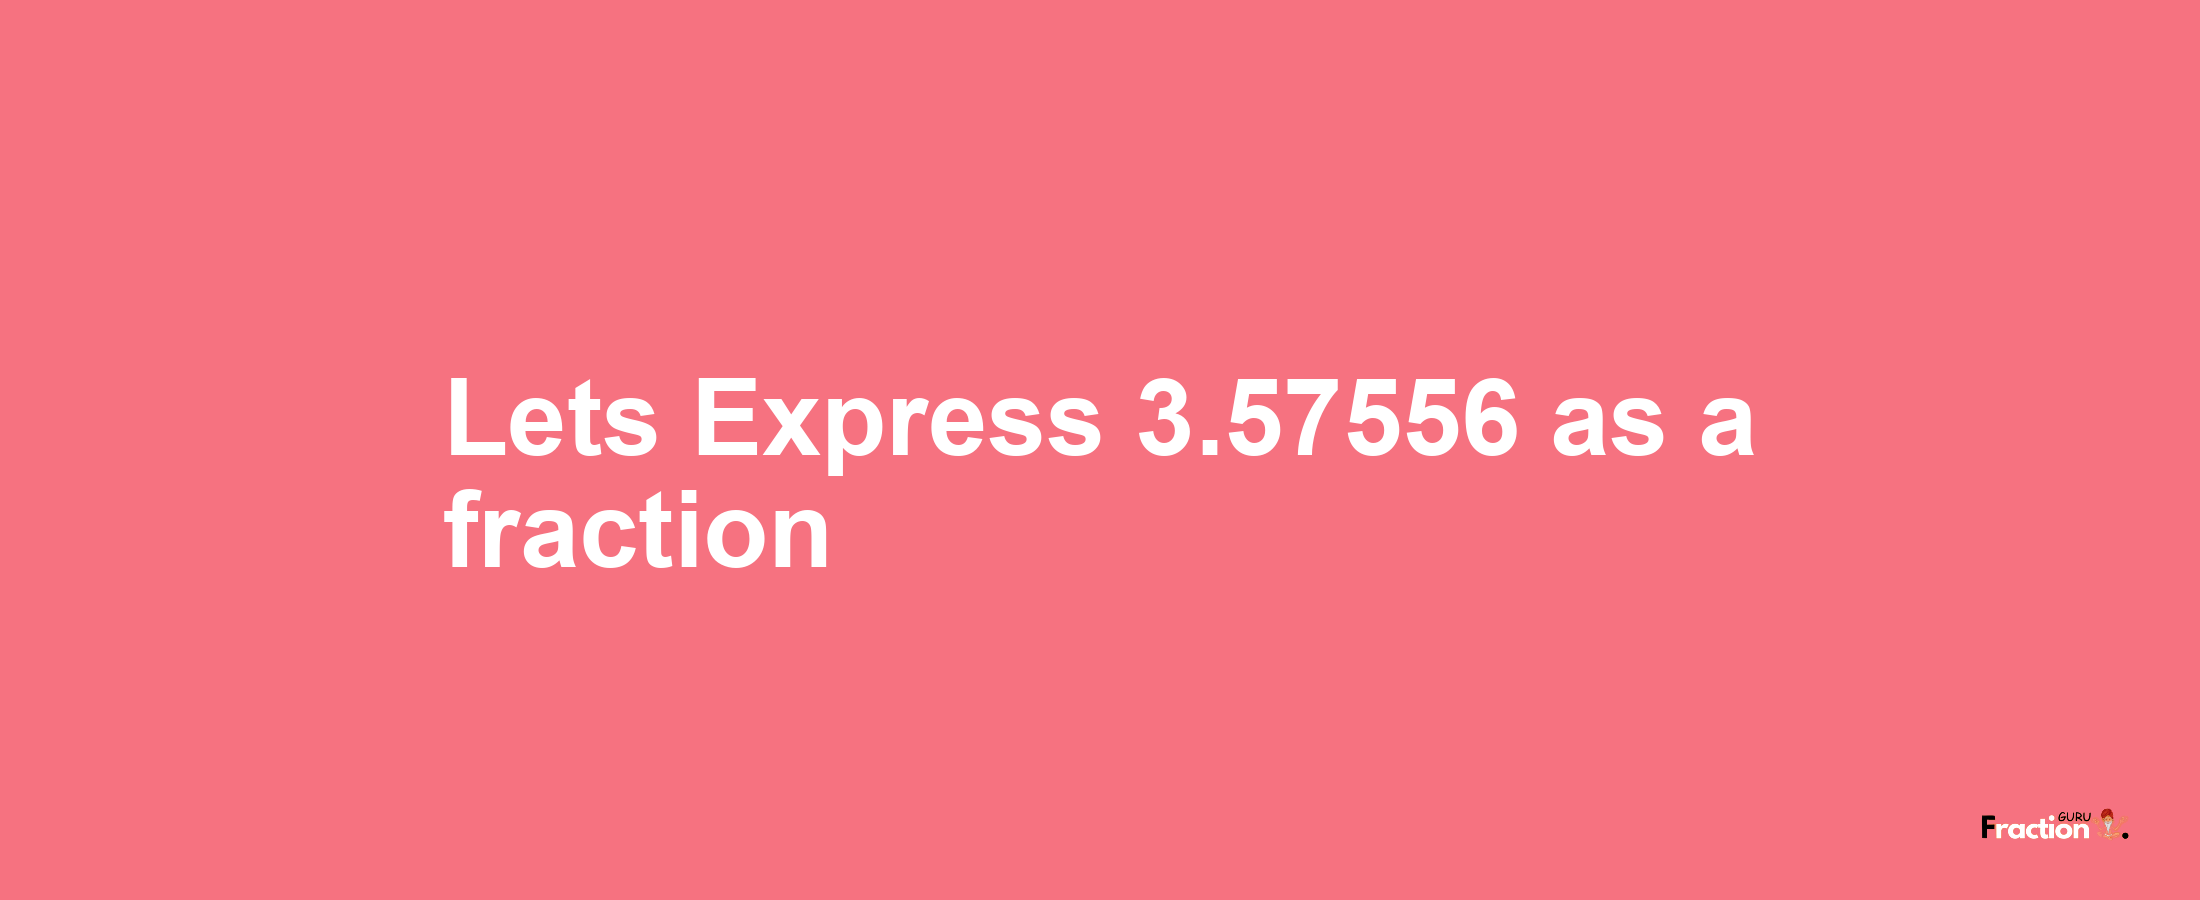 Lets Express 3.57556 as afraction